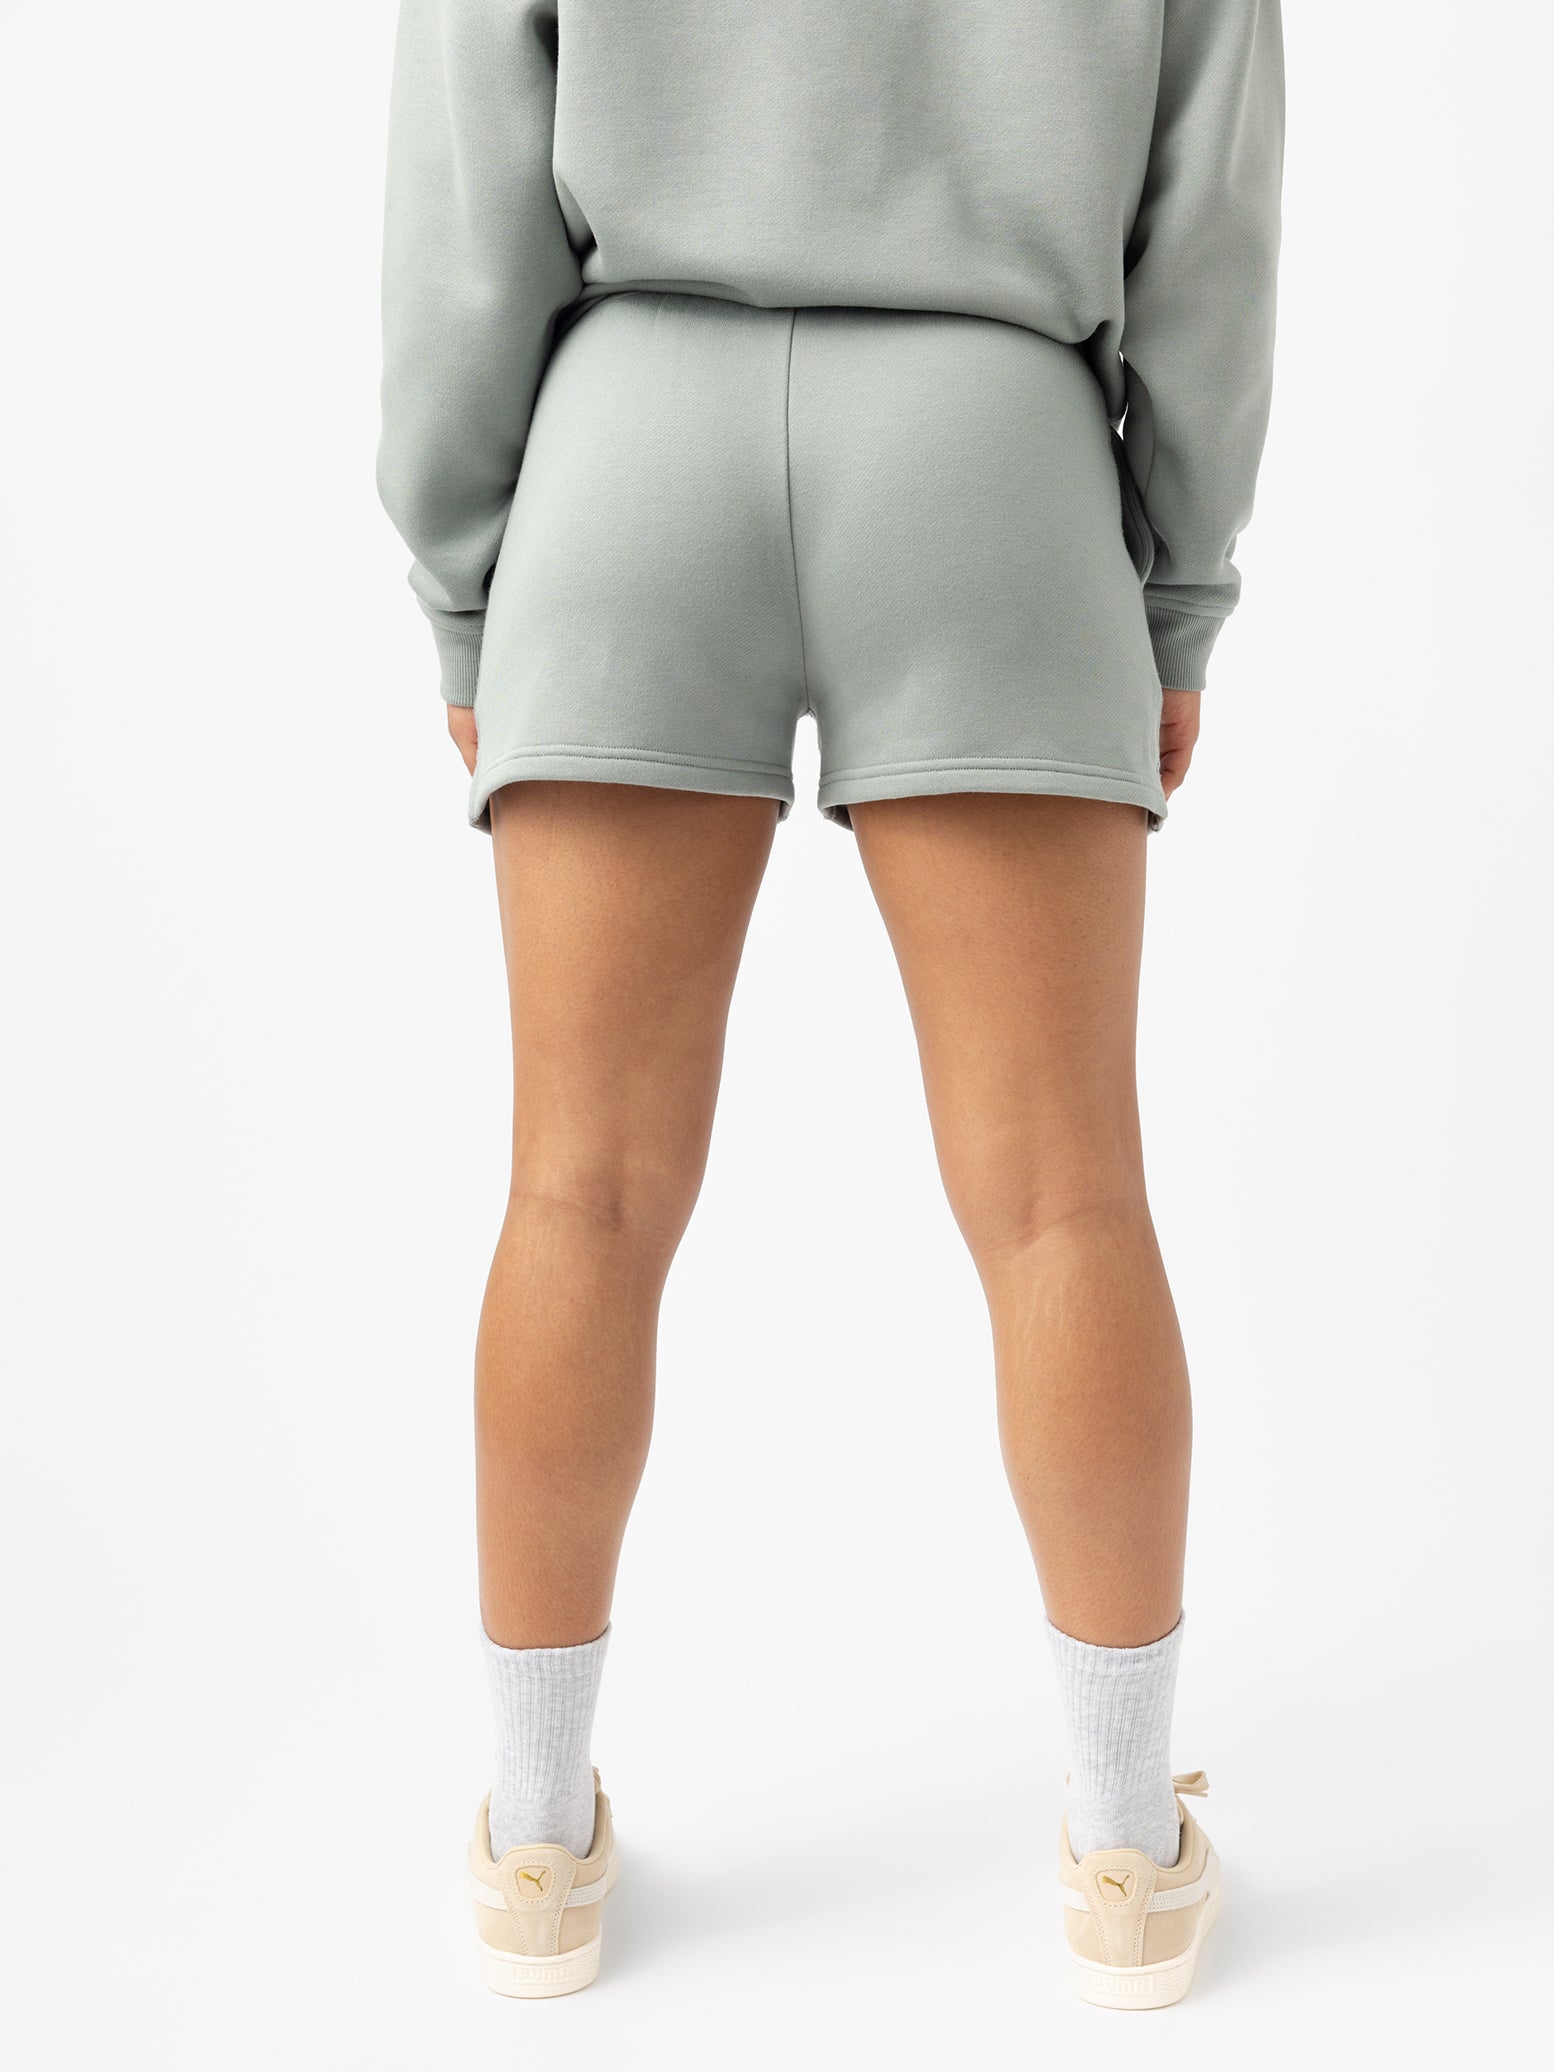 Haze CityScape Shorts. The shorts are being worn by a female model in skate shoes. The background it a white background. 